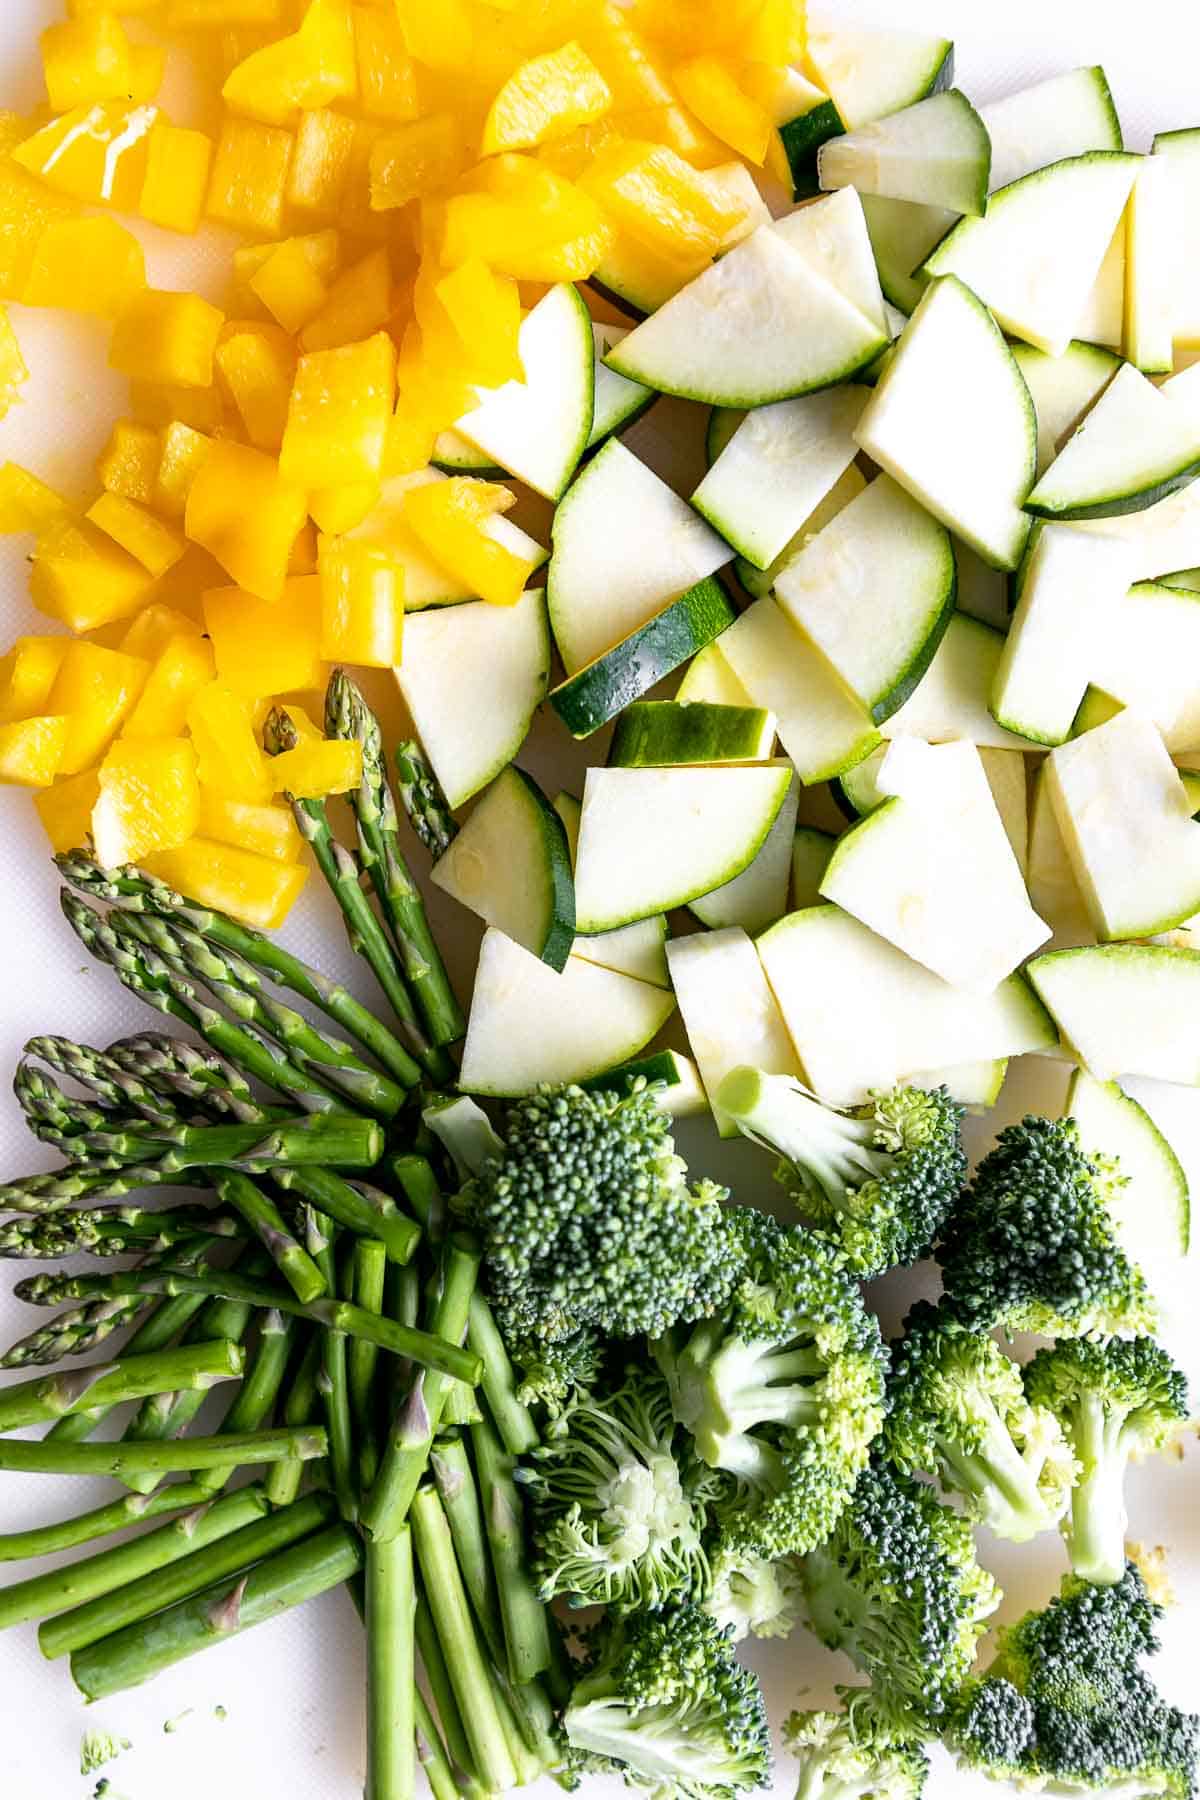 diced vegetables on a white cutting board